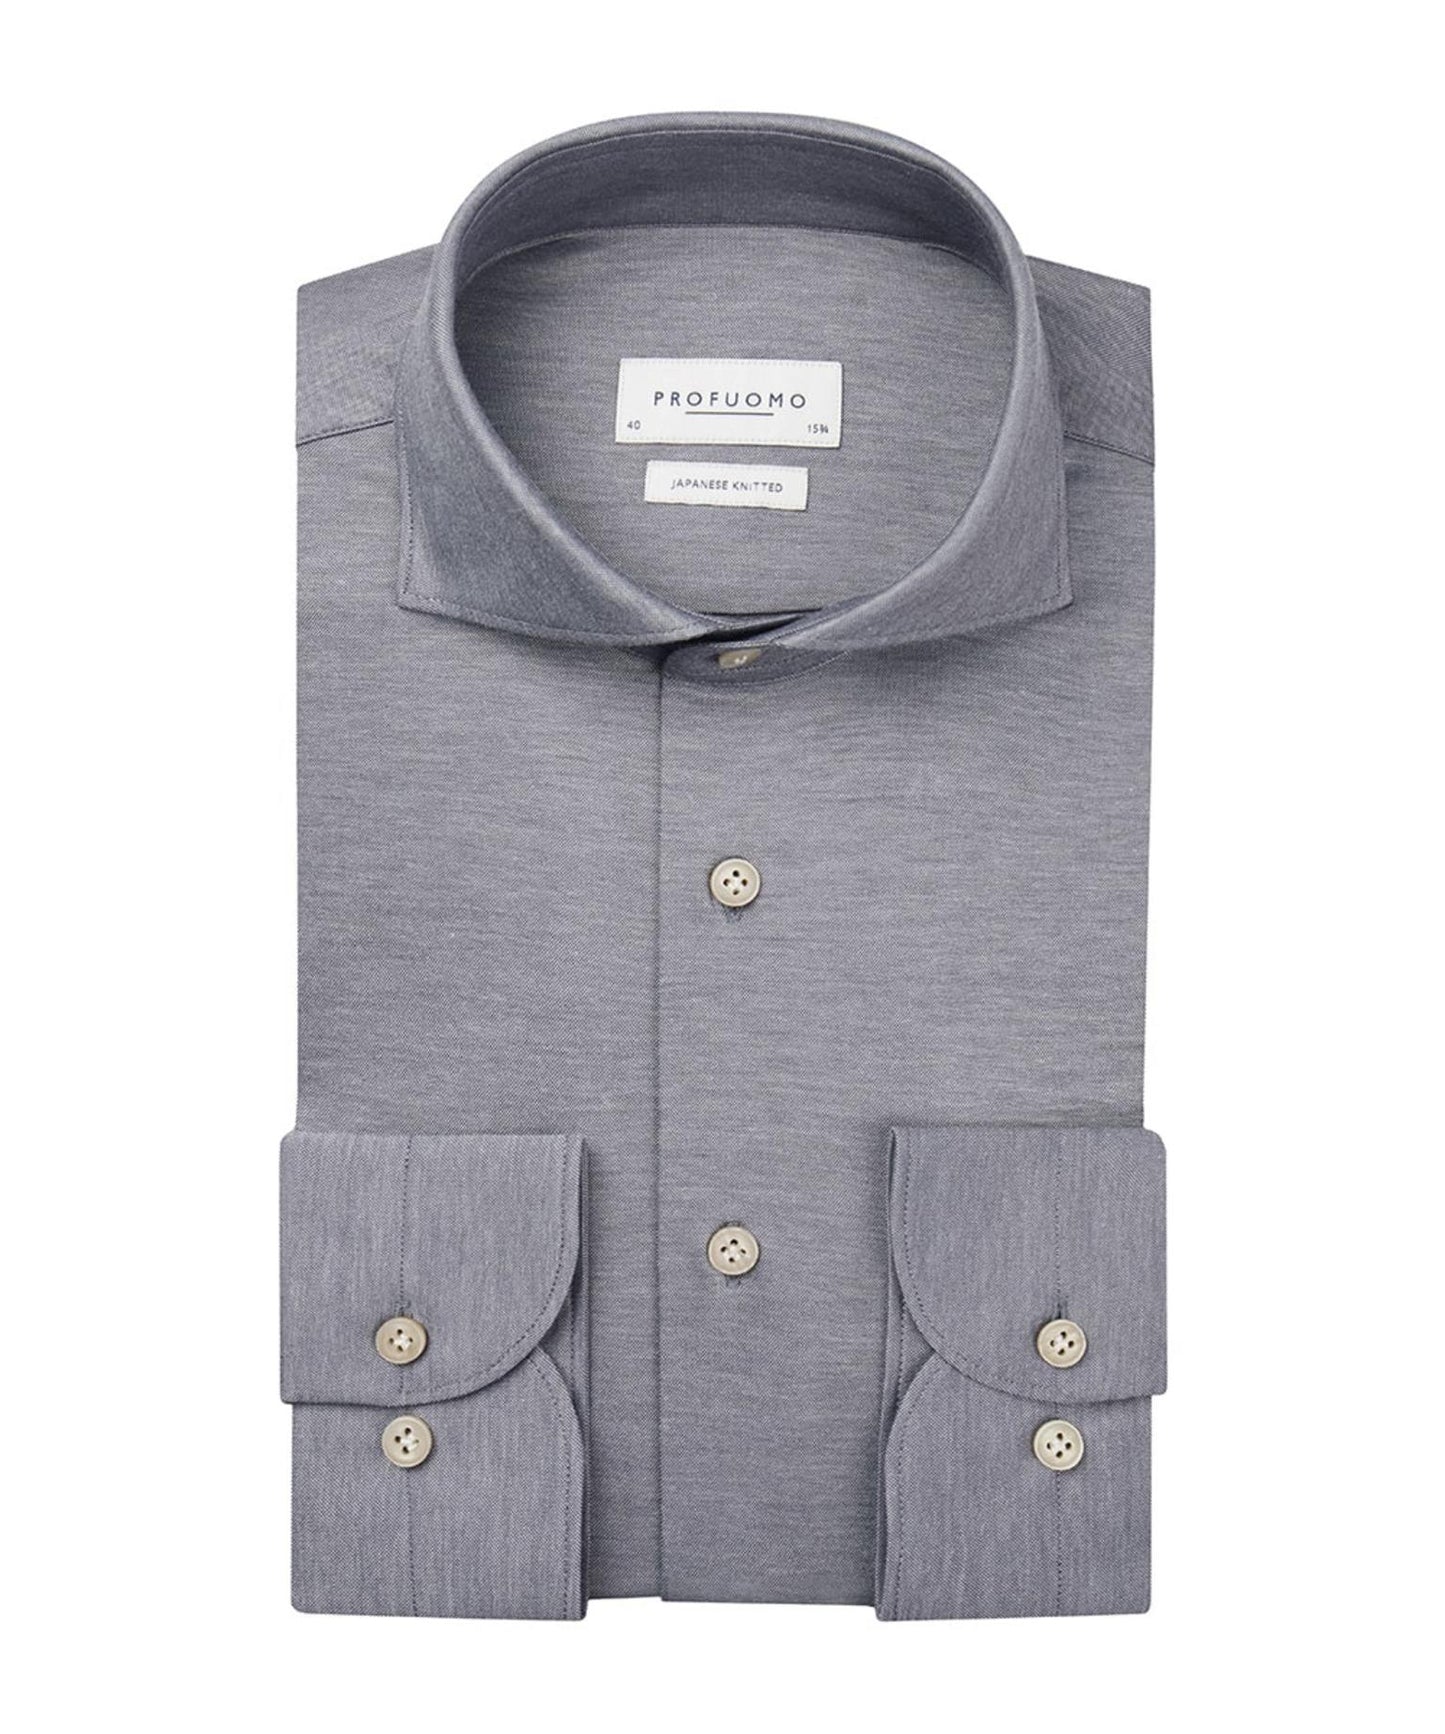 Grey japanese knitted slim fit shirt Profuomo - PPTH30018C